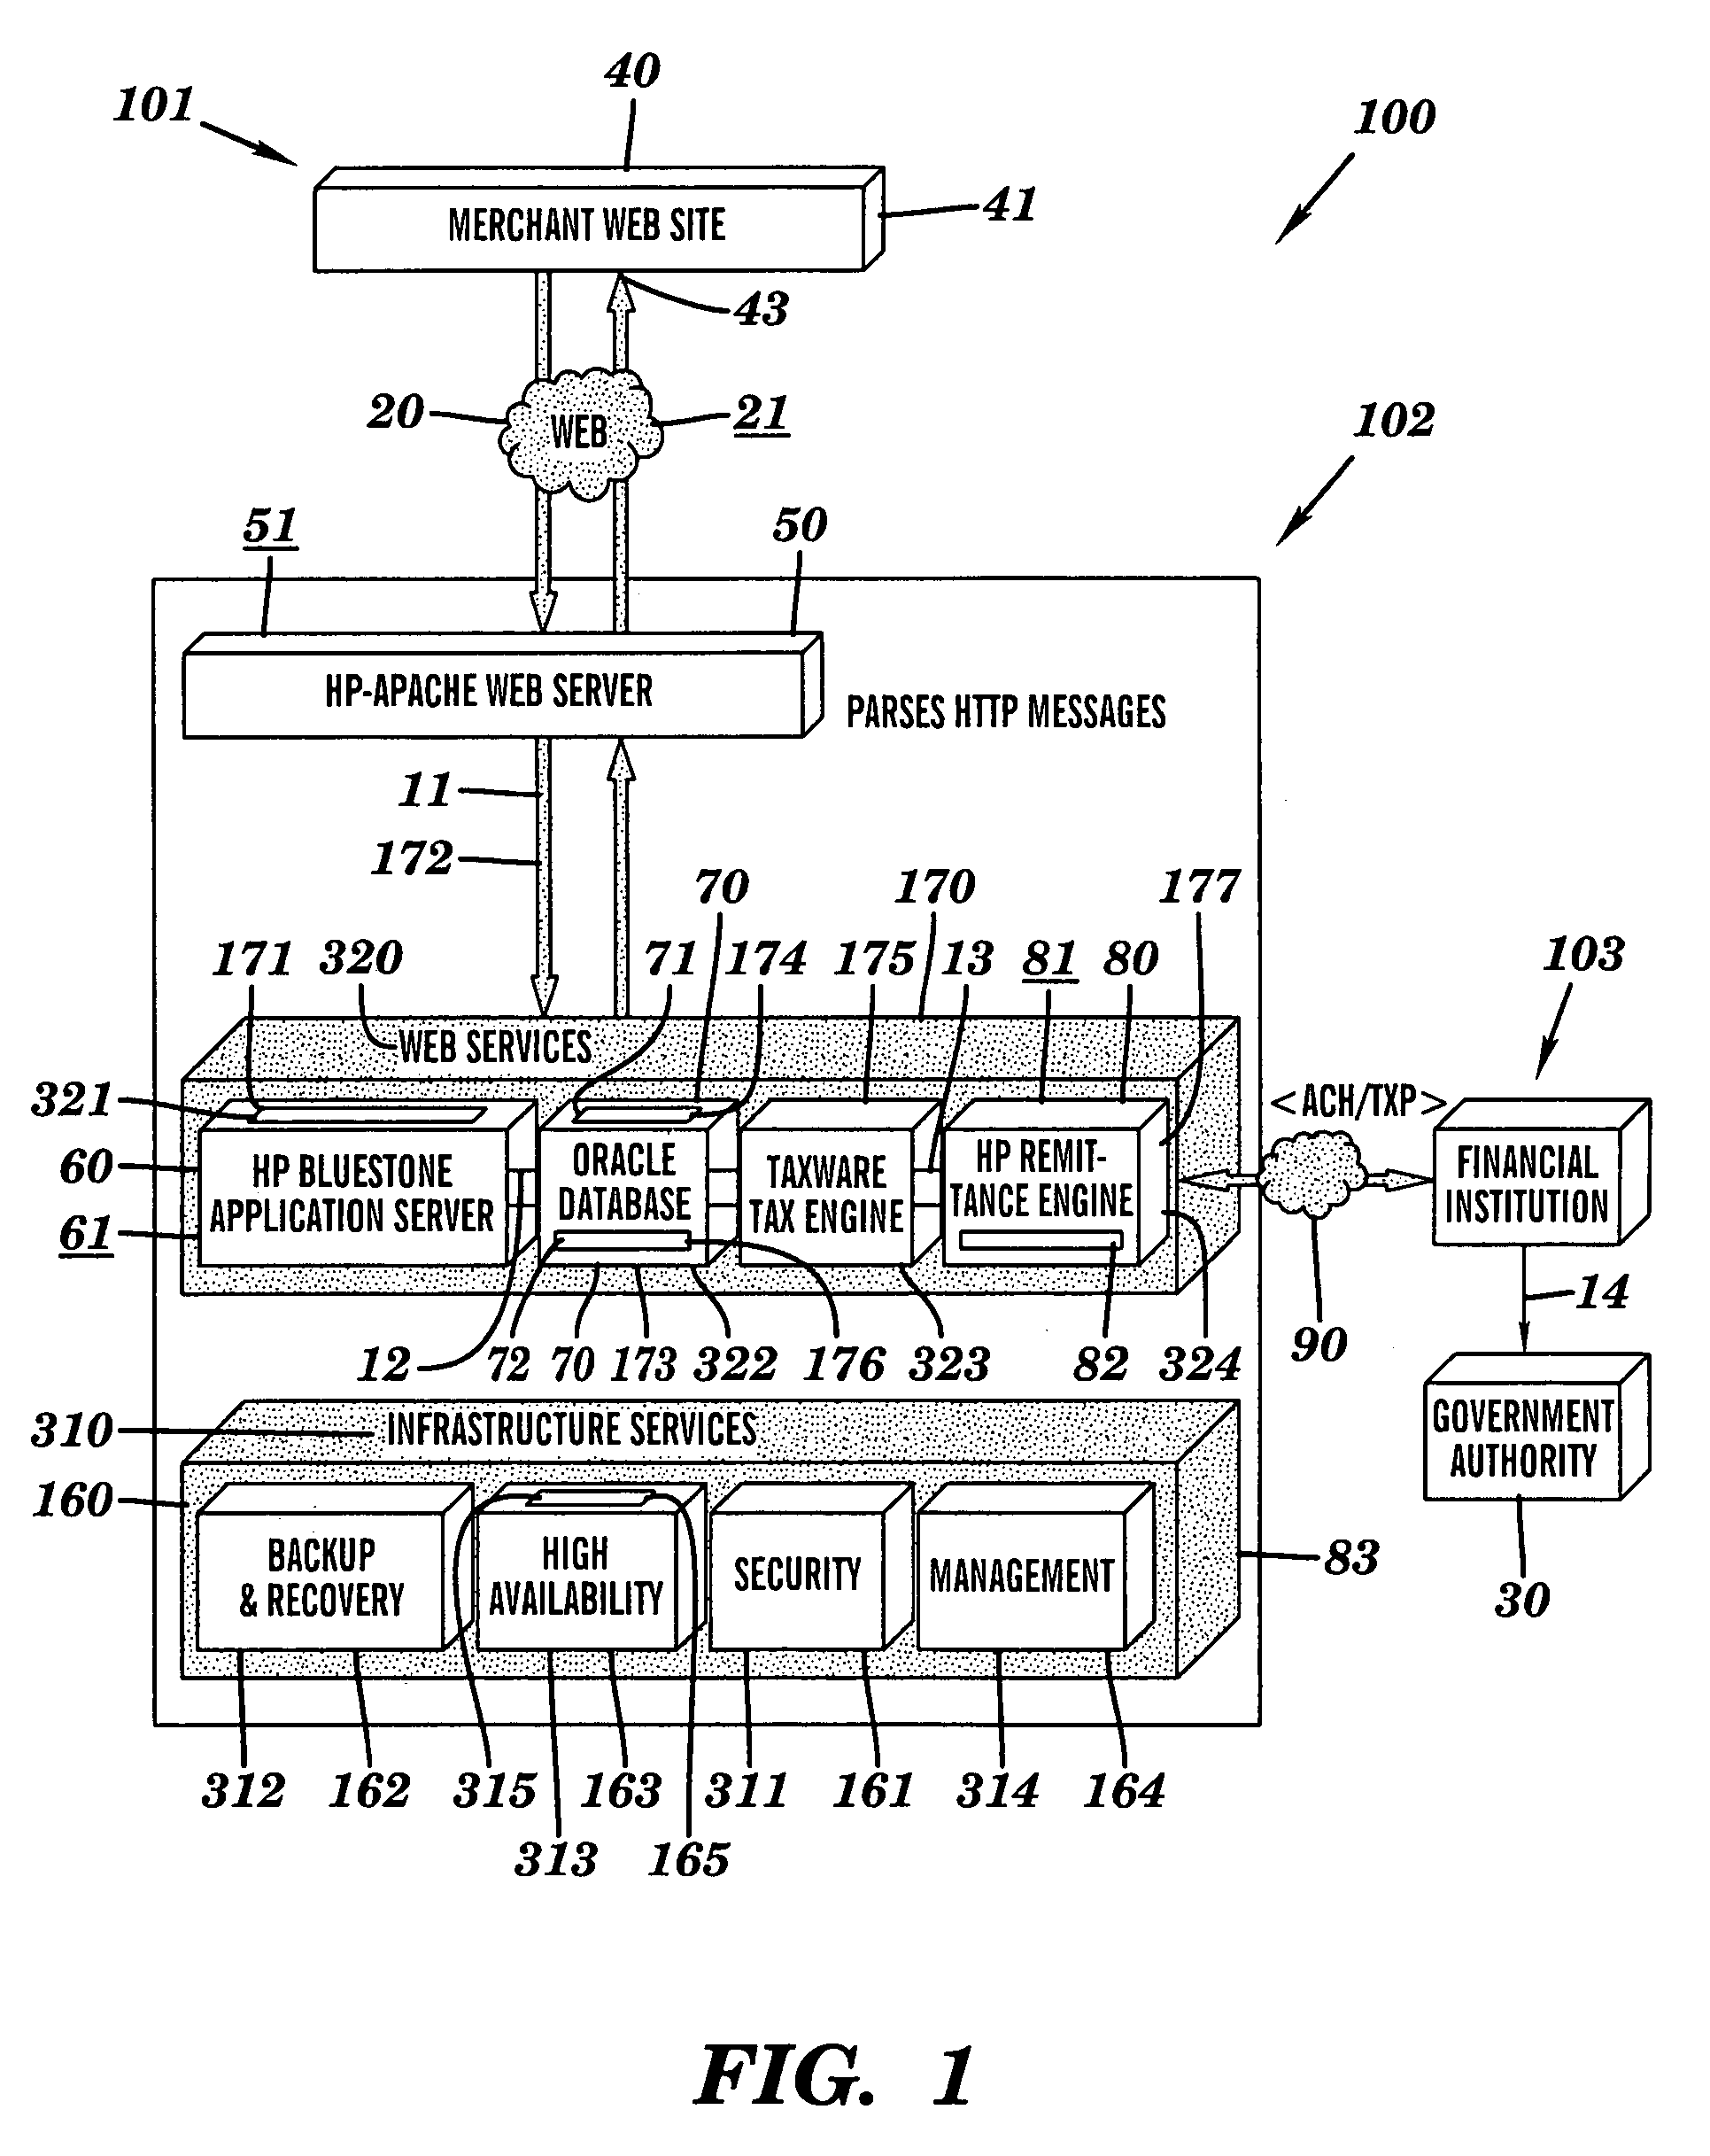 Intelligent apparatus, system and method for financial data computation, report remittance and funds transfer over an interactive communications network